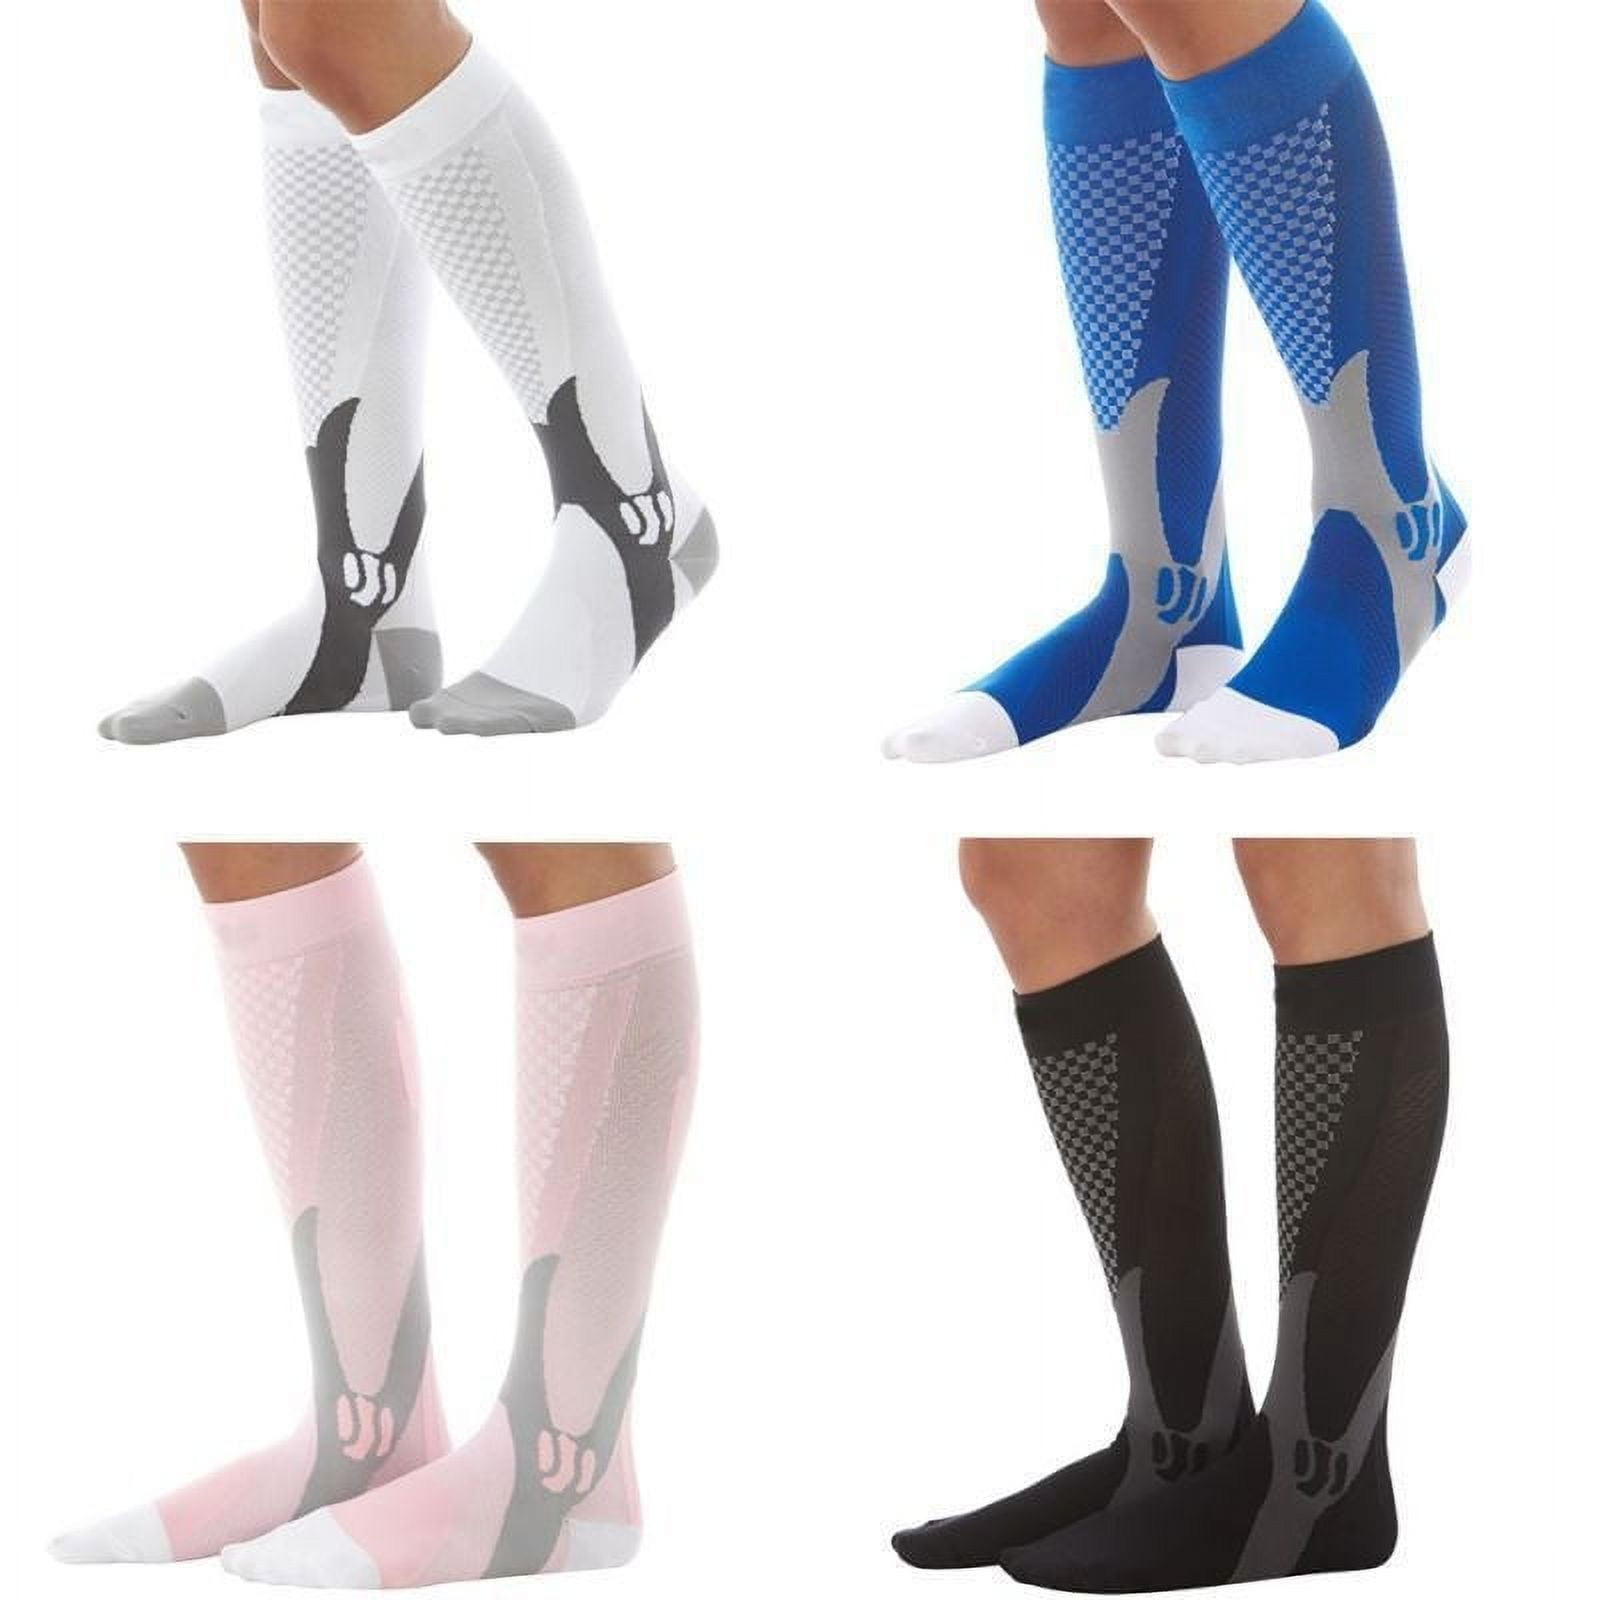 Soccer Socks, Sport Knee High Socks Calf Compression Athletic Socks for  Mens and Women - XW02154 - Brilliant Promotional Products